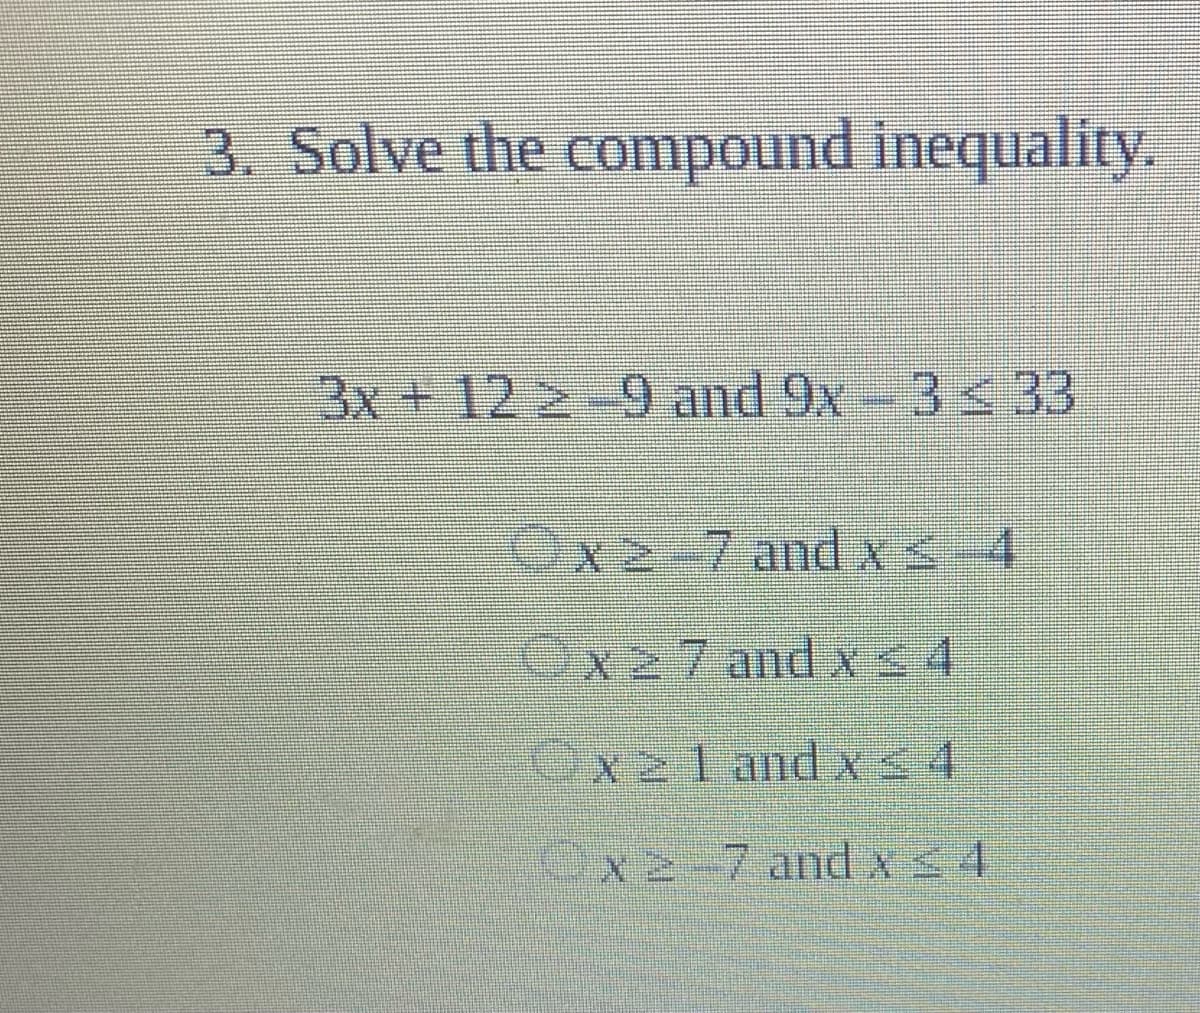 3. Solve the compound inequality.
3x + 12 2 9and 9x-3< 33
Cx-7and x< 4
Ox27 and XS4
Ox2l and X< 4
ex2-7and AS4
